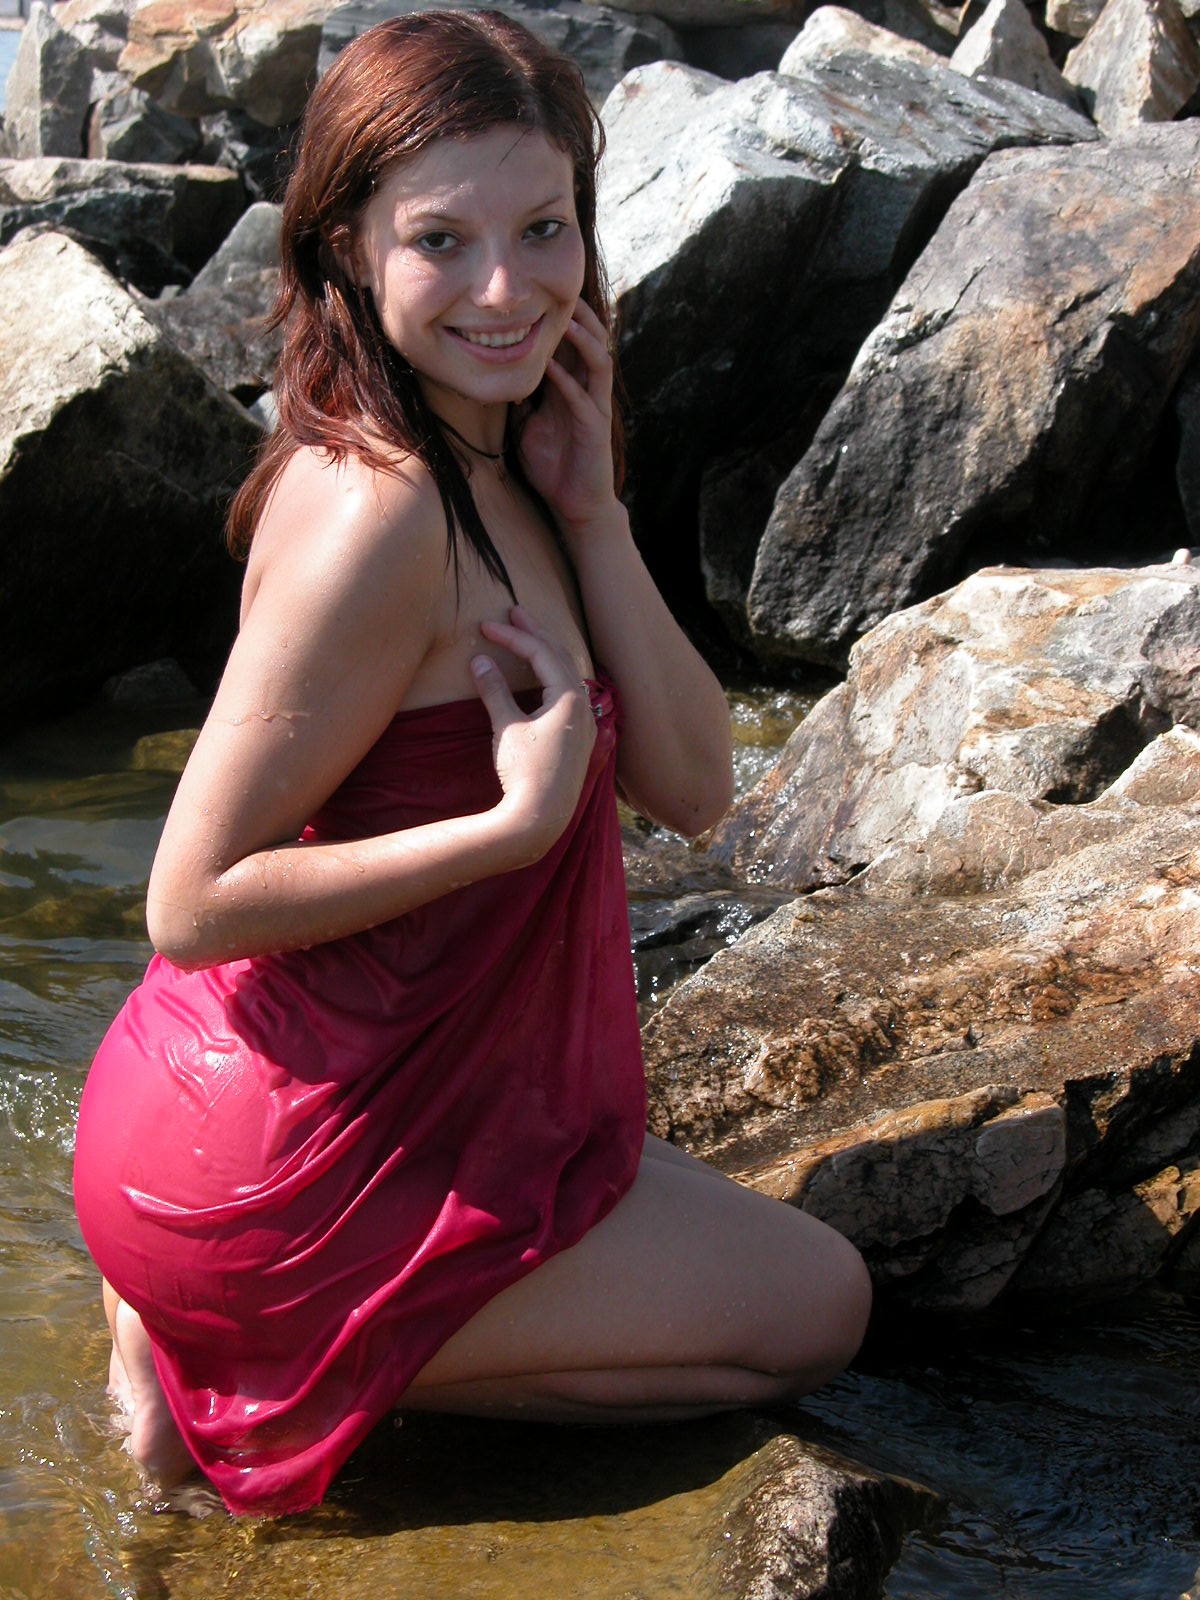 Awesome chick poses on the rocks